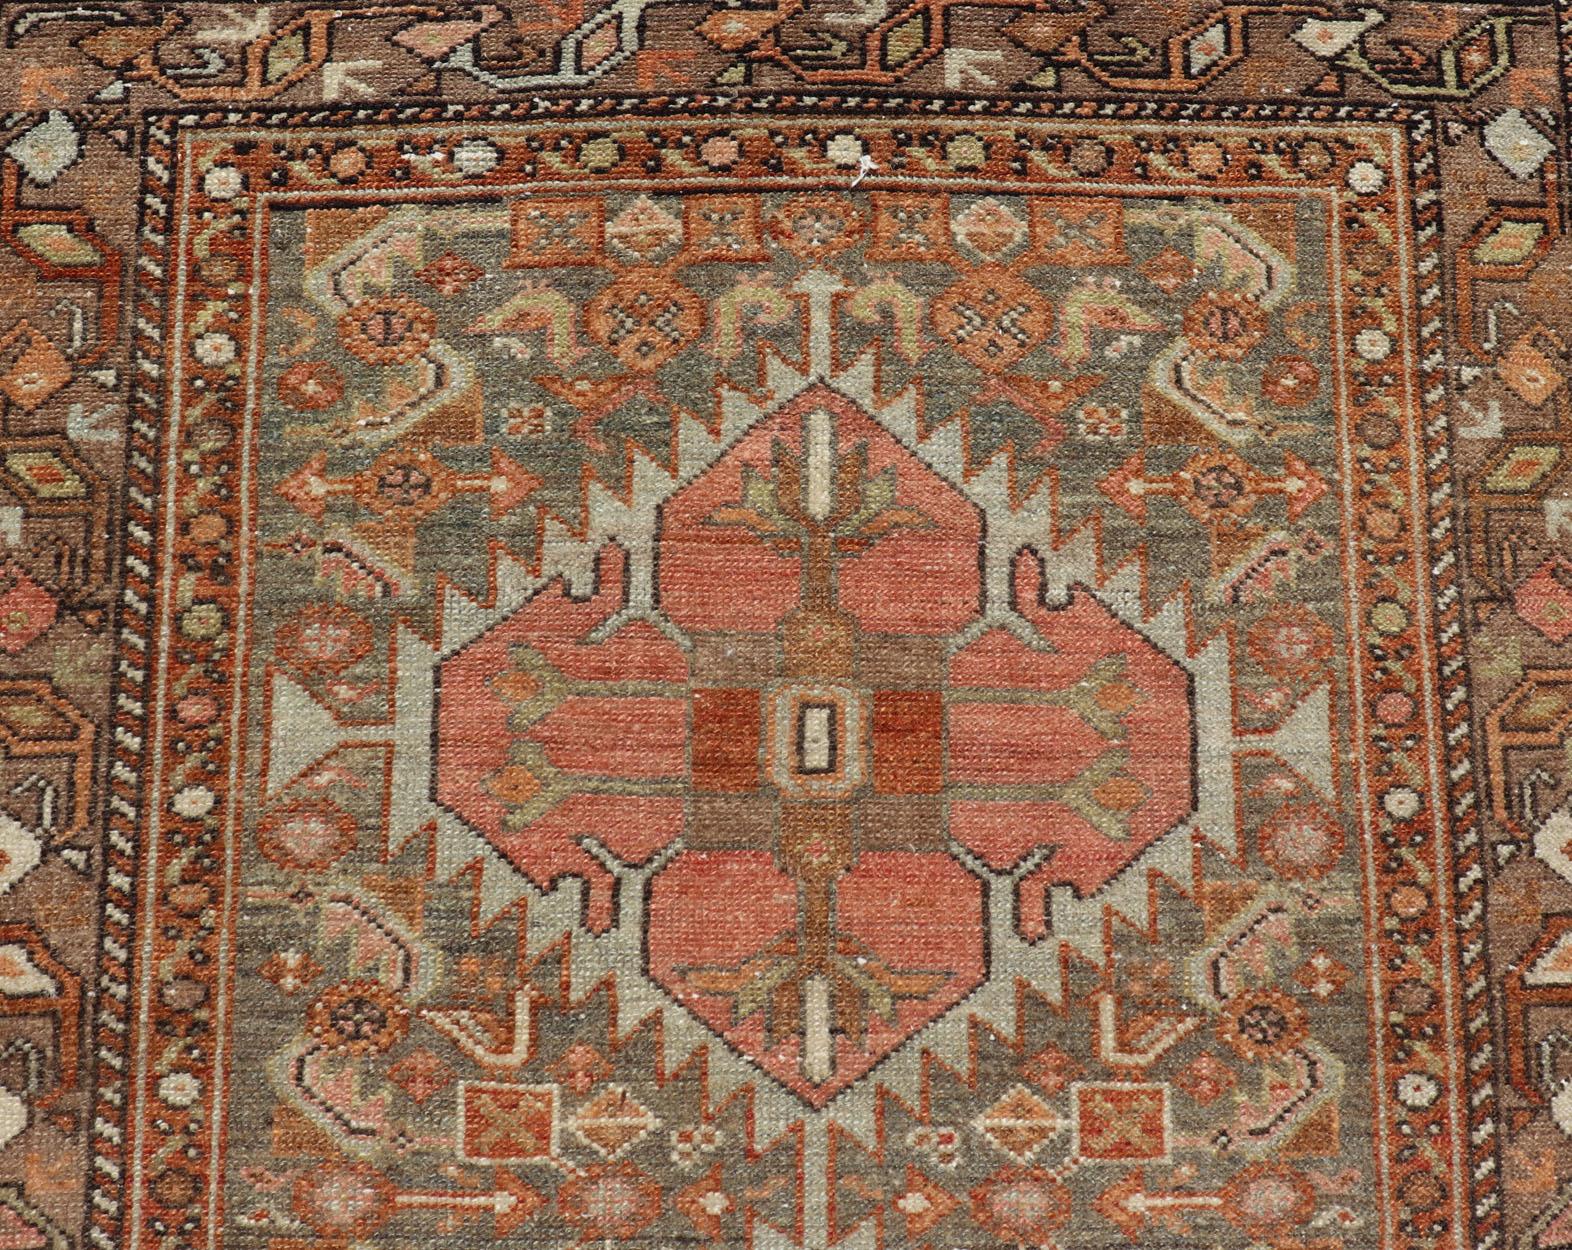 Antique Persian Hamedan in Rustic Earthy Tones With Tribal Medallions For Sale 1